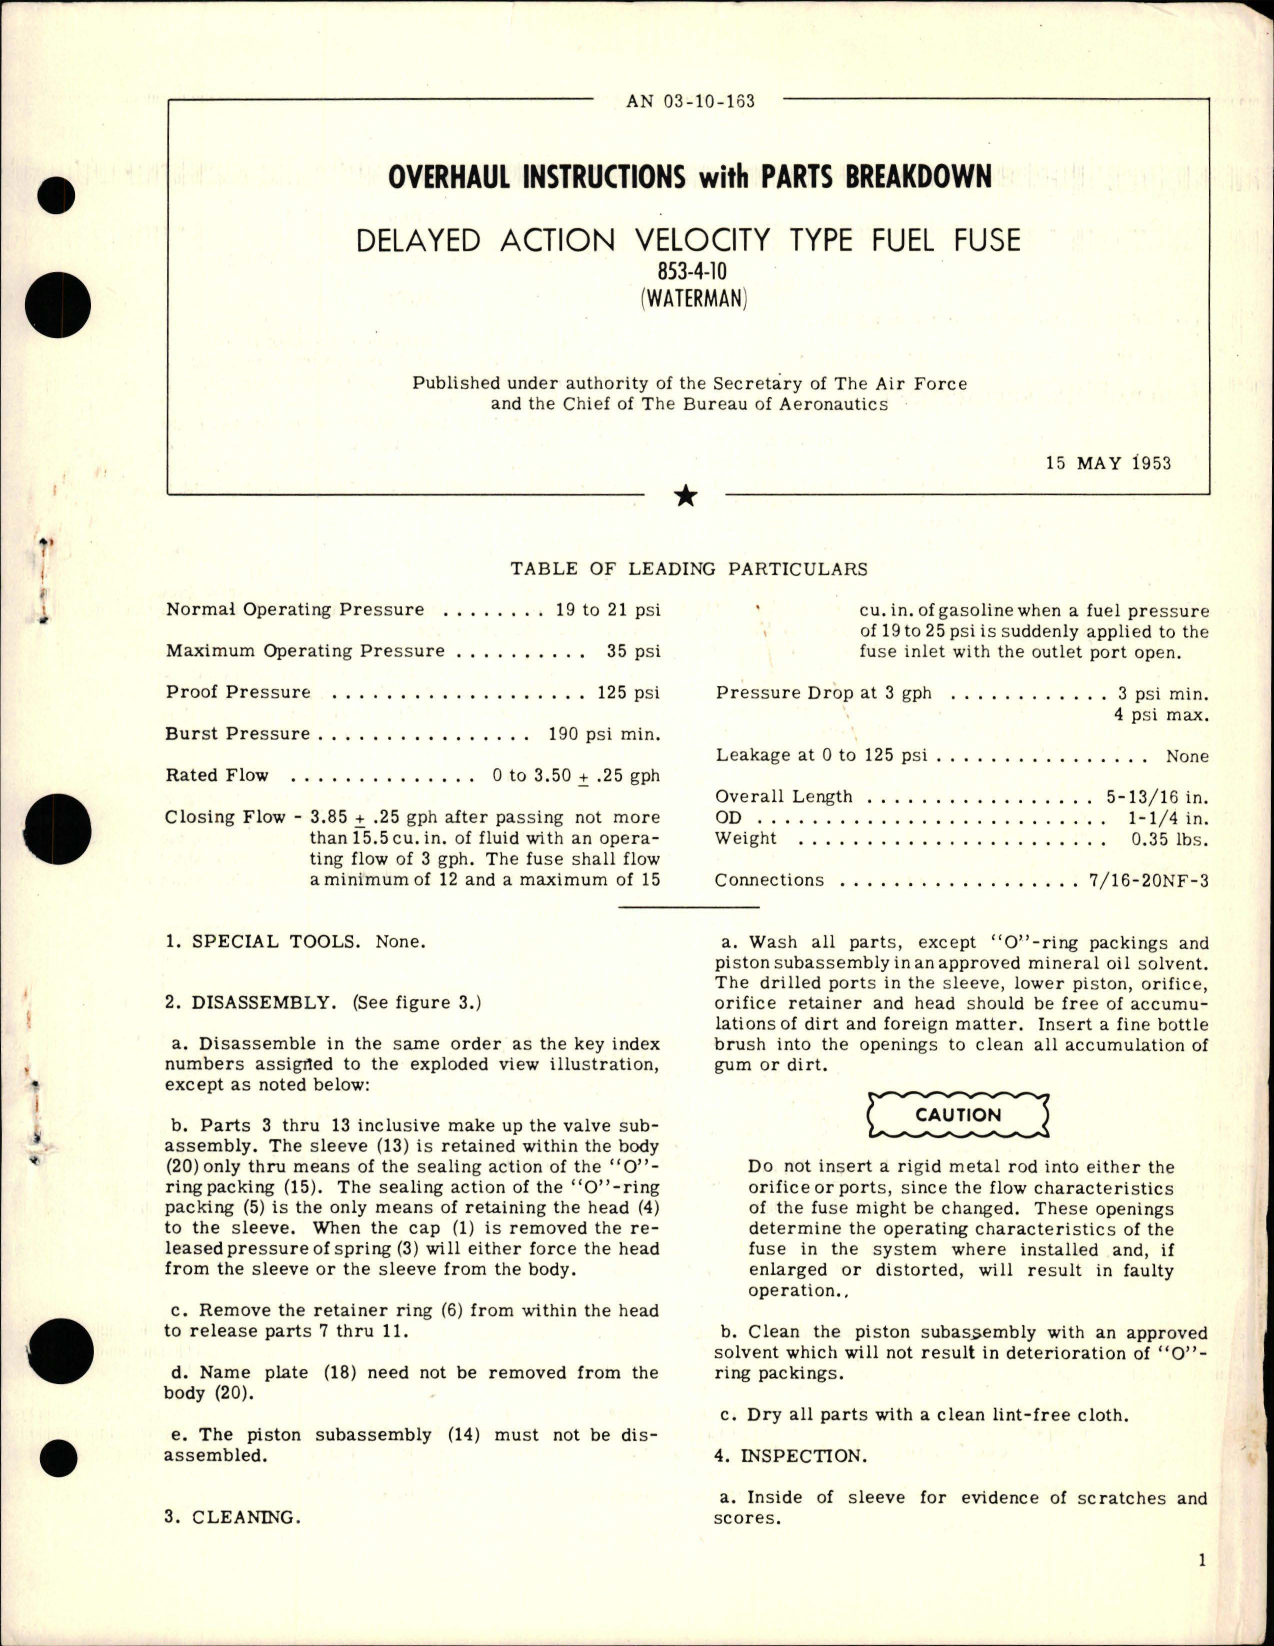 Sample page 1 from AirCorps Library document: Overhaul Instructions with Parts Breakdown for Delayed Action Velocity Type Fuel Fuse - 853-4-10